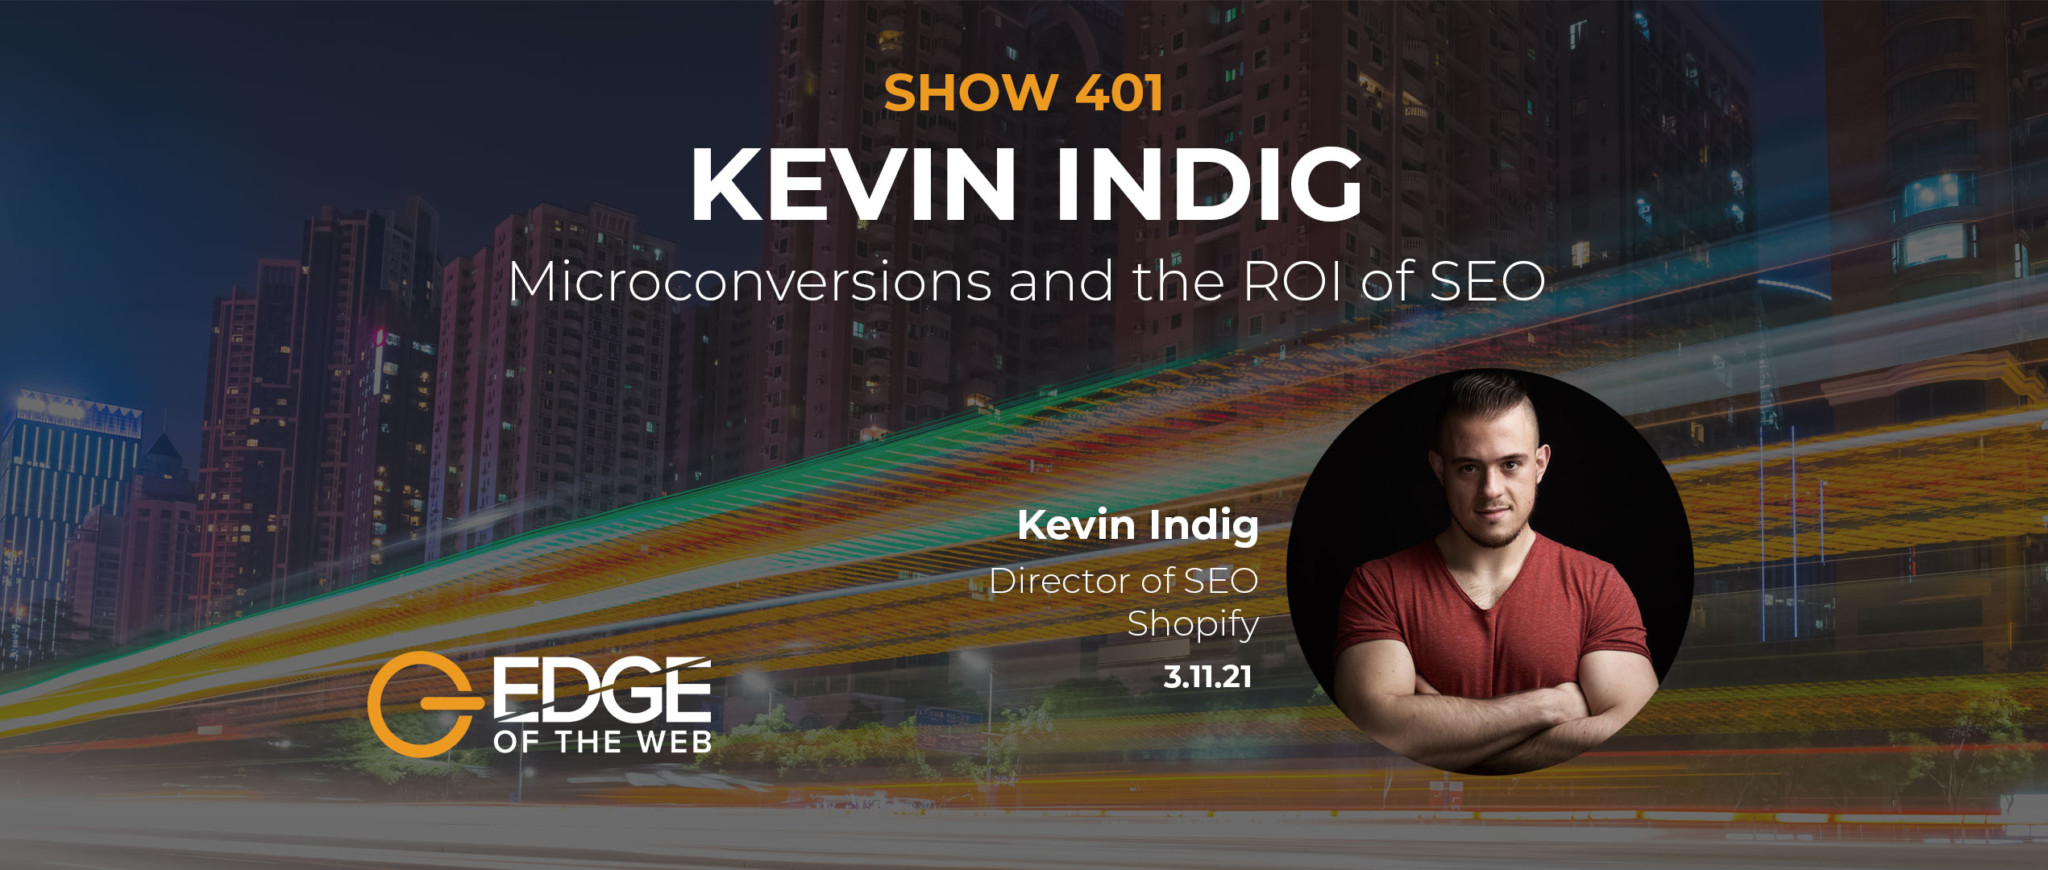 Kevin Indig EDGE Featured Image